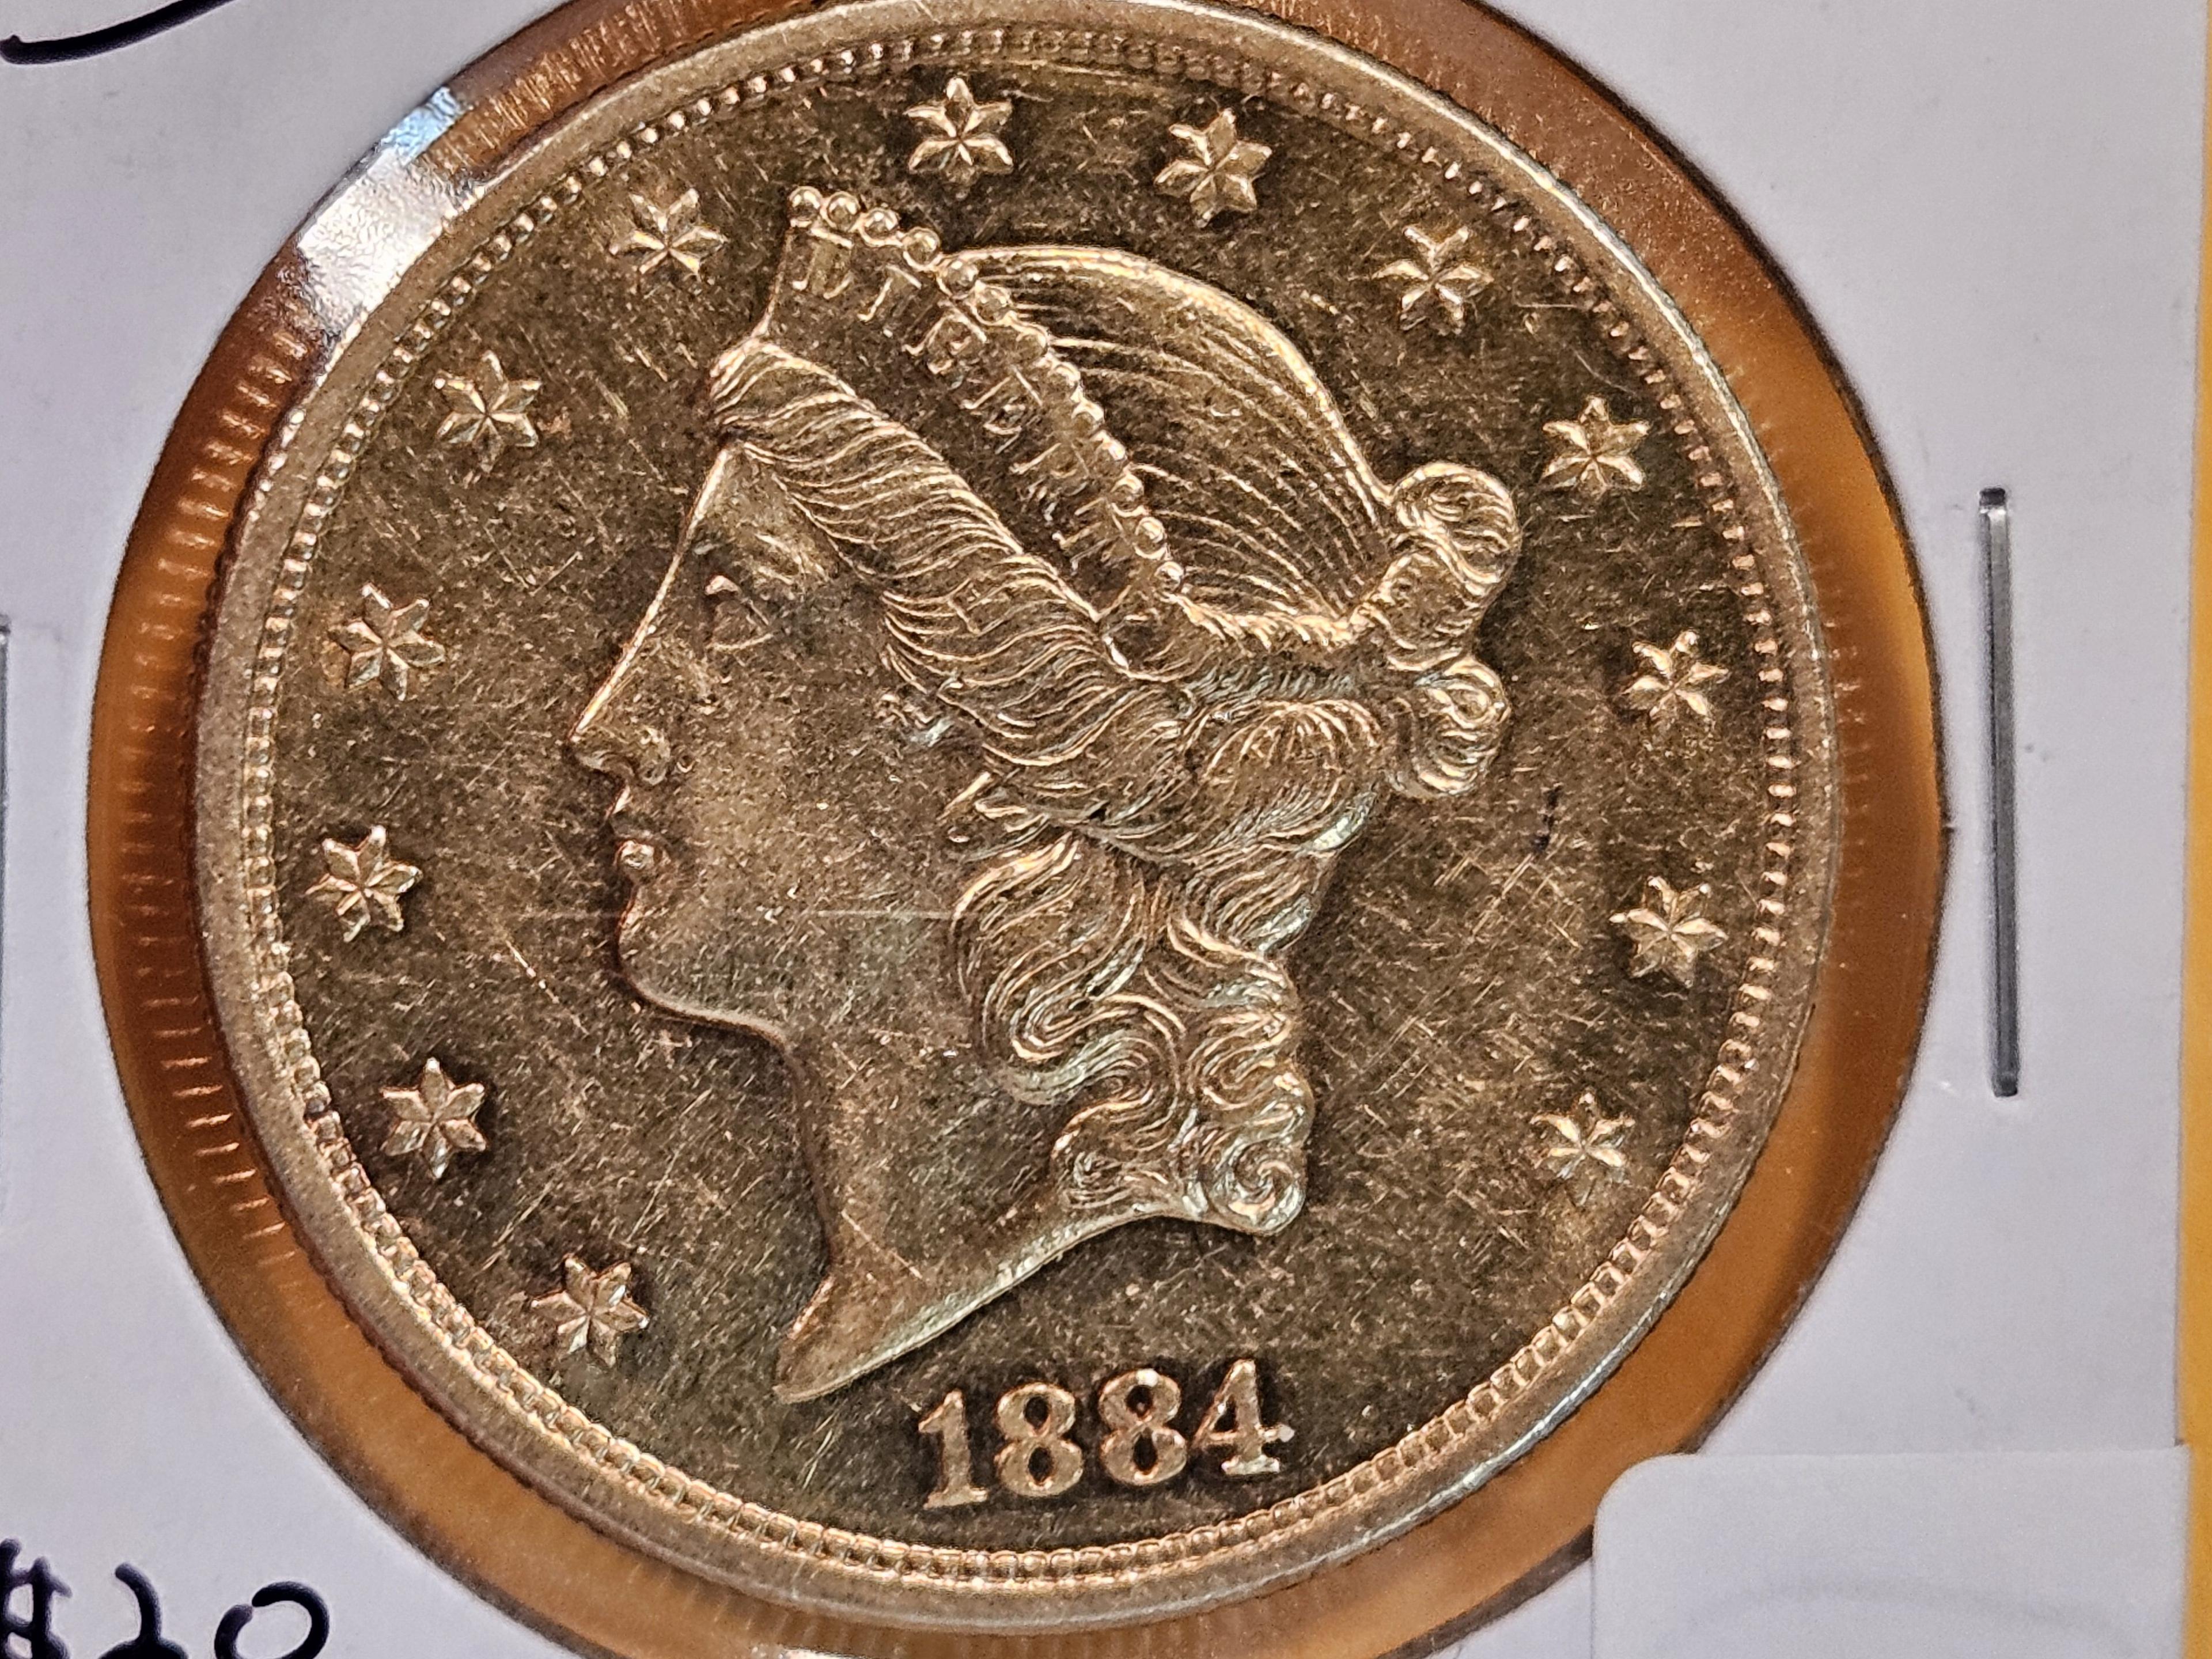 GOLD! Brilliant Uncirculated 1884-S Liberty Head $20 Gold Double Eagle